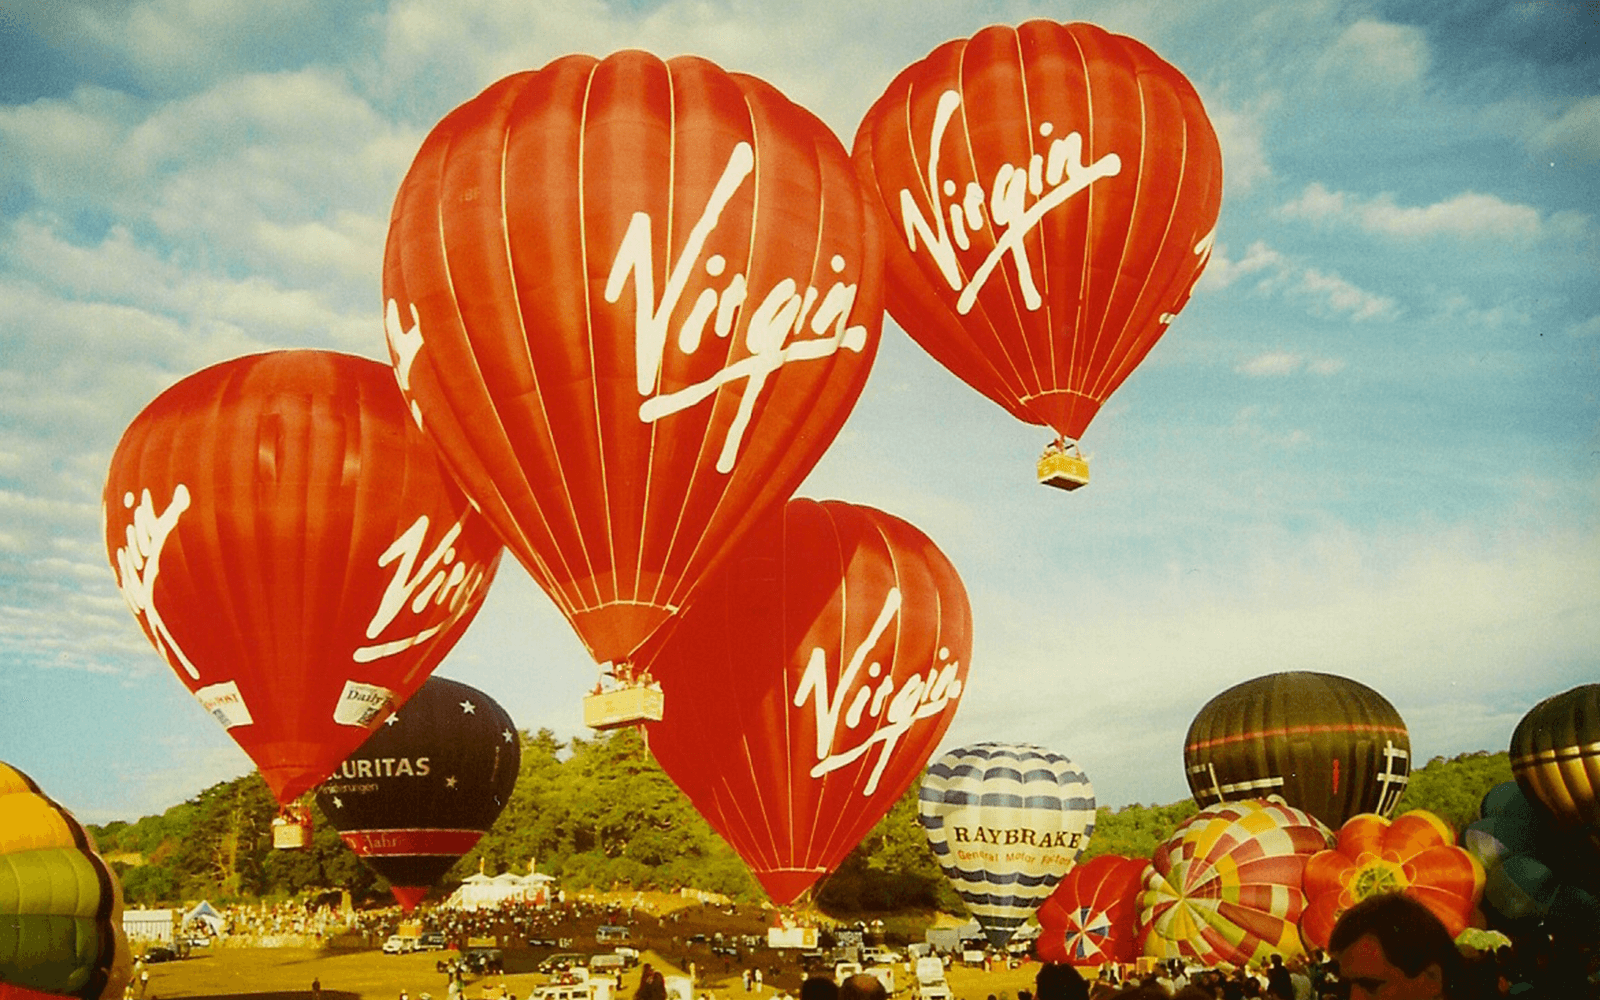 A historic image of four Virgin Balloon Flights taking to the air